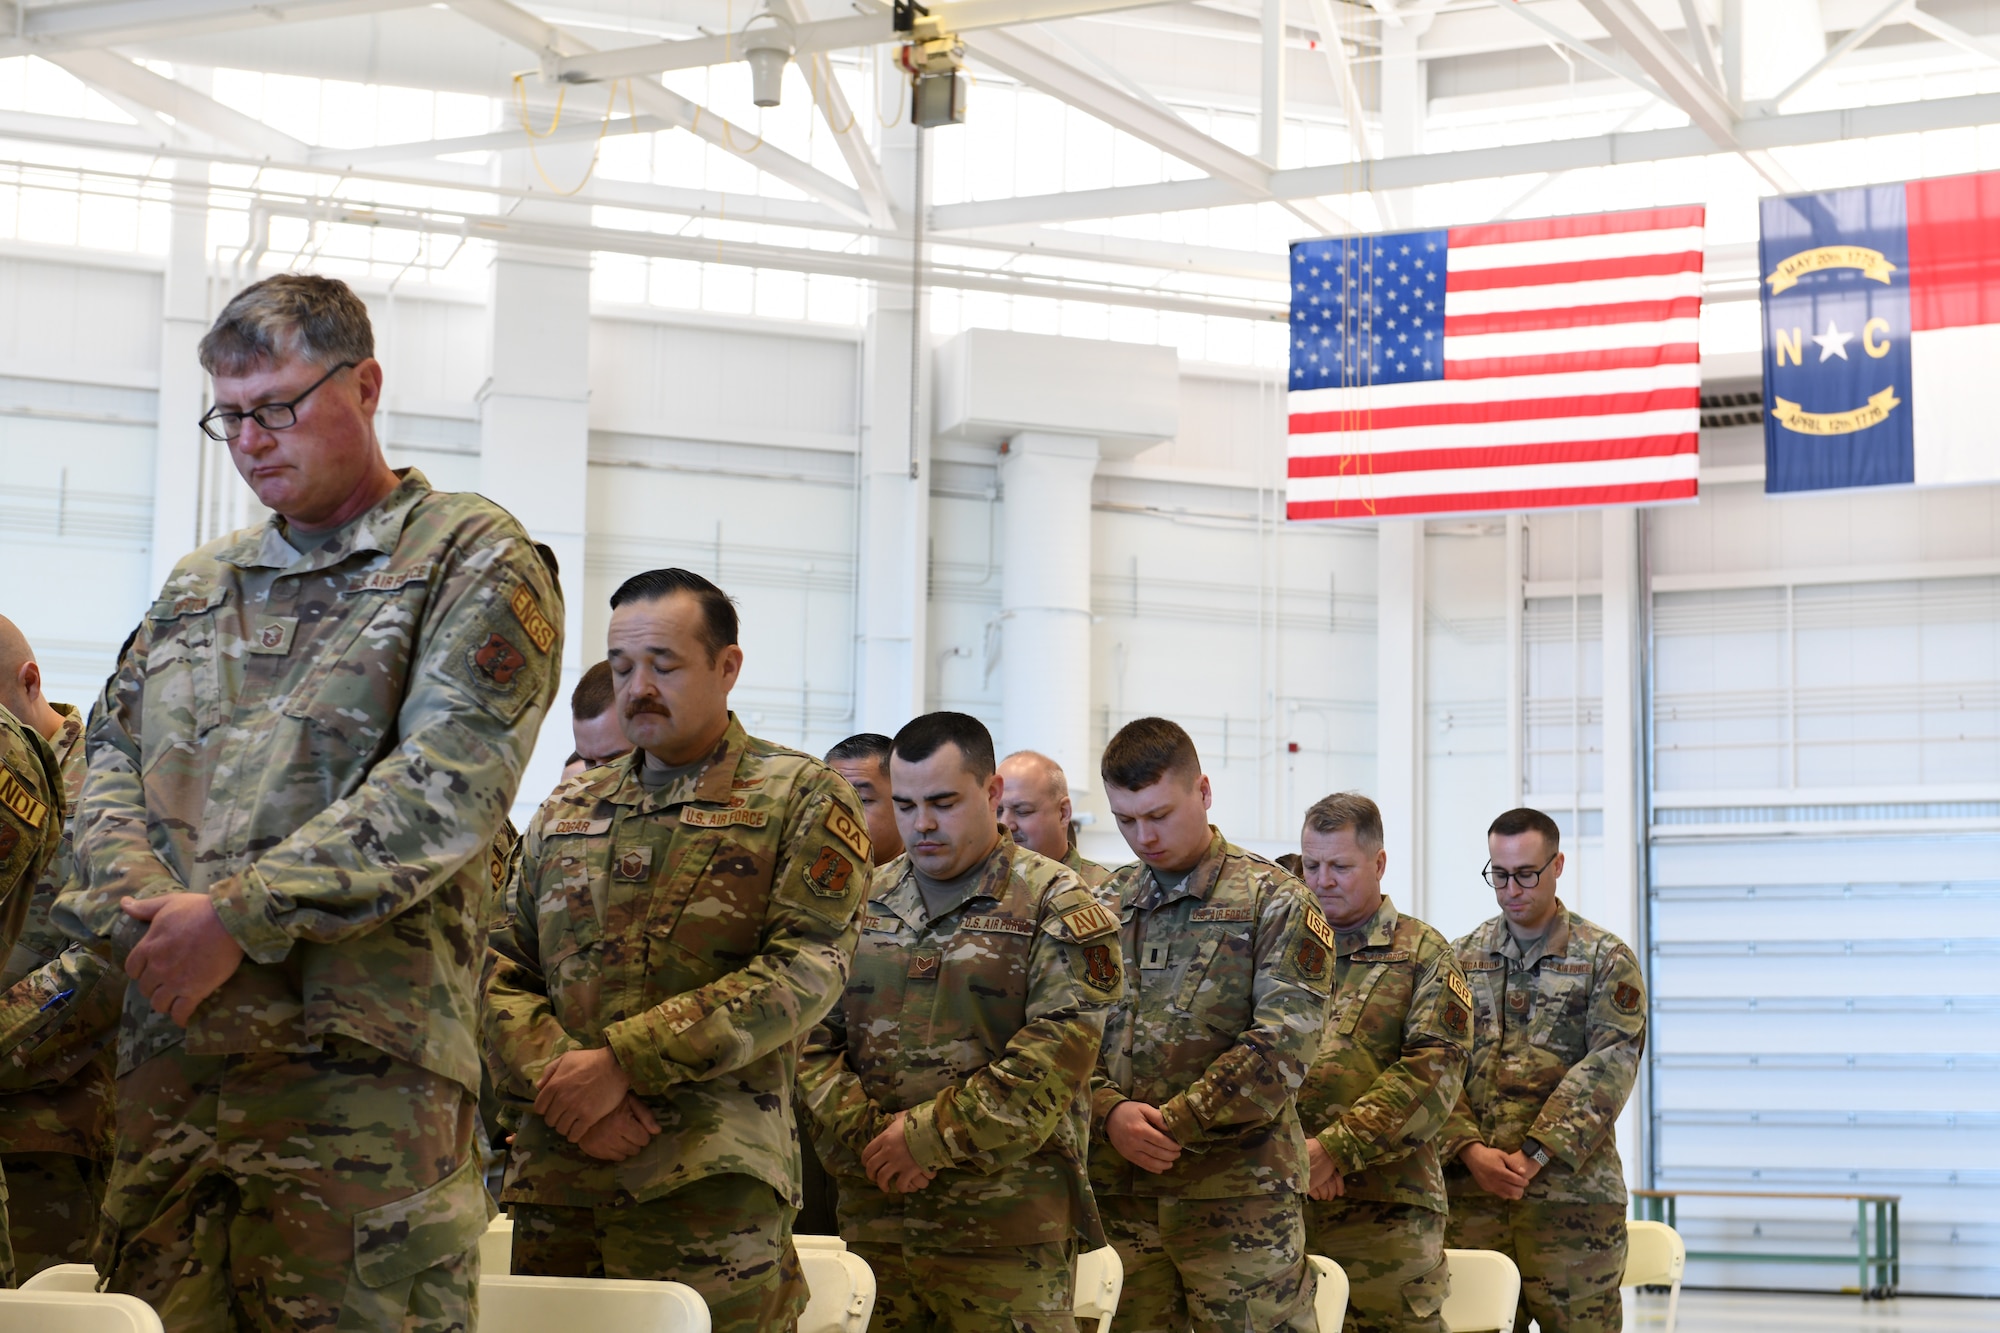 Members of the North Carolina Air National guard stands respectfully during the 75th anniversary and ribbon-cutting ceremony.